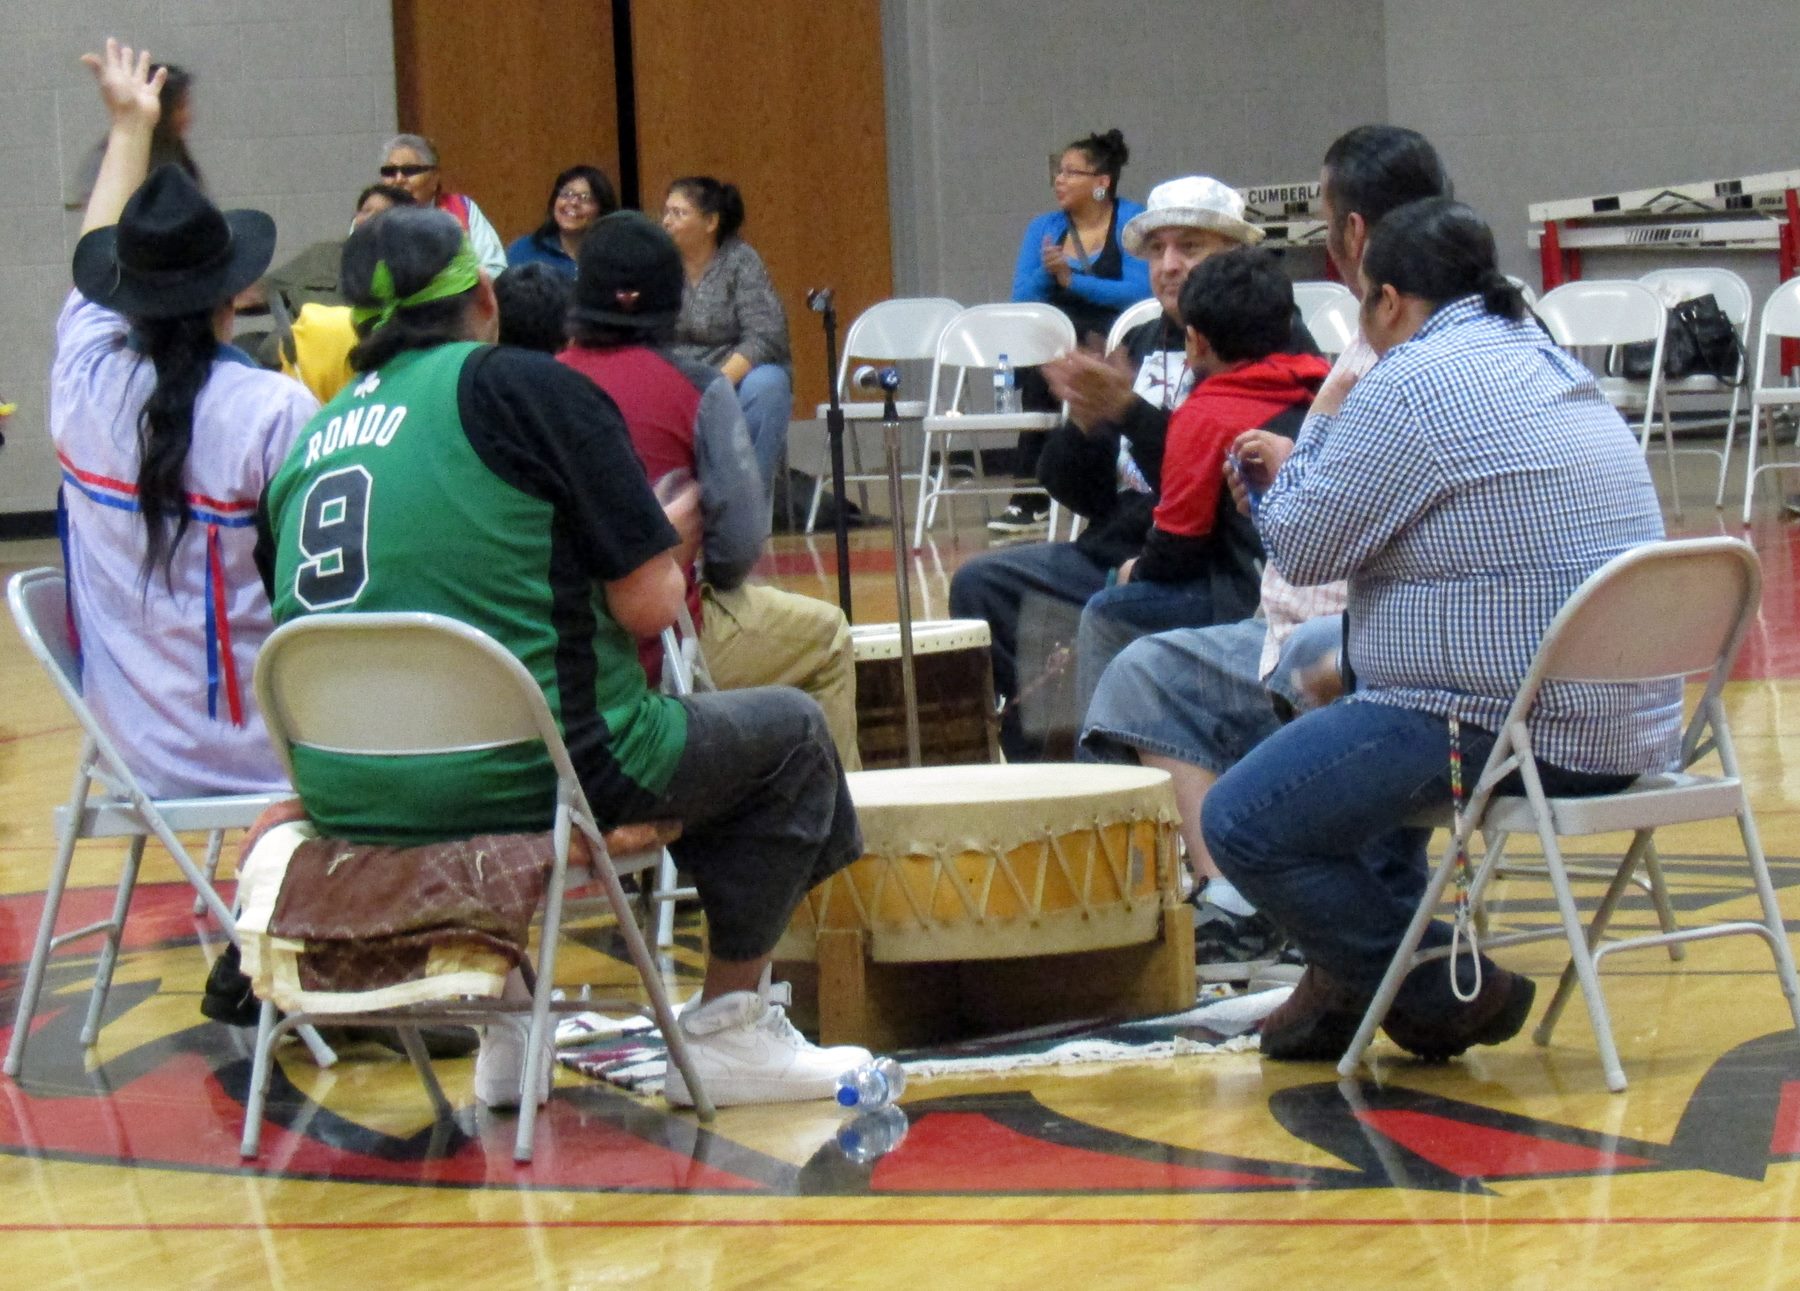 St. Croix Chippewa Tribe ordered to reinstate five ousted members